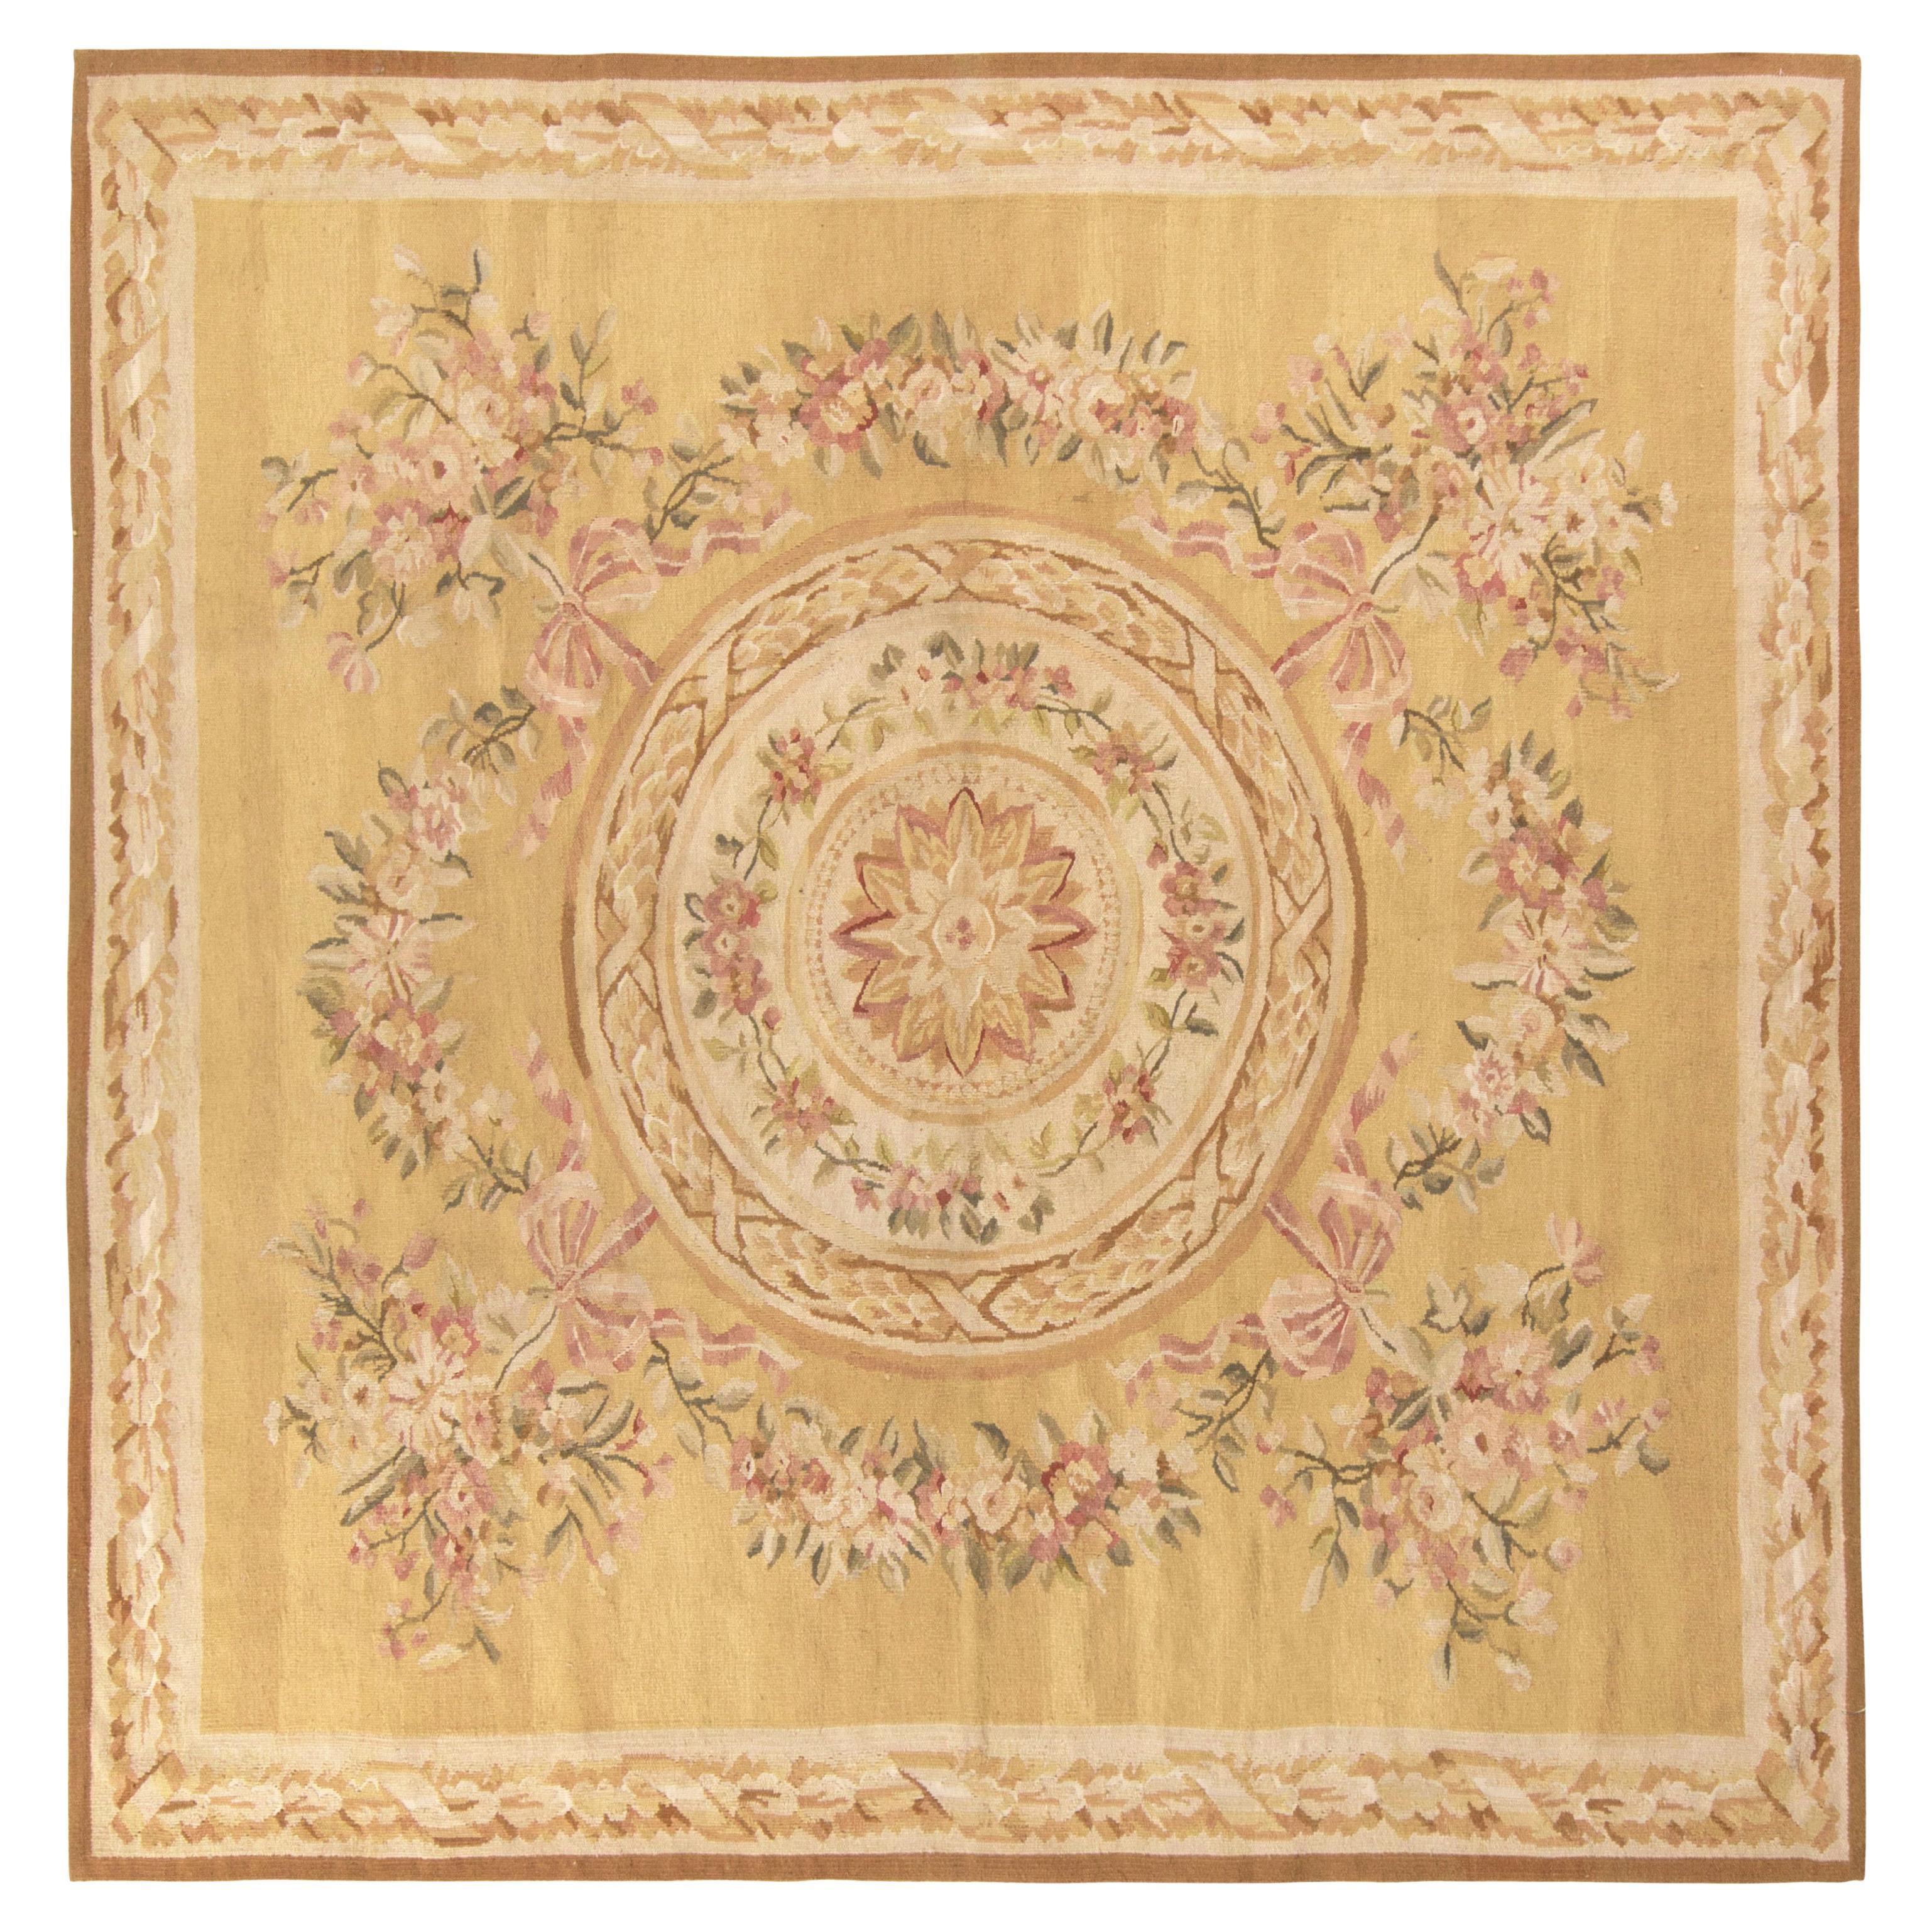 Rug & Kilim’s Aubusson Style Flat Weave in Beige, Cream Medallion Floral Pattern For Sale